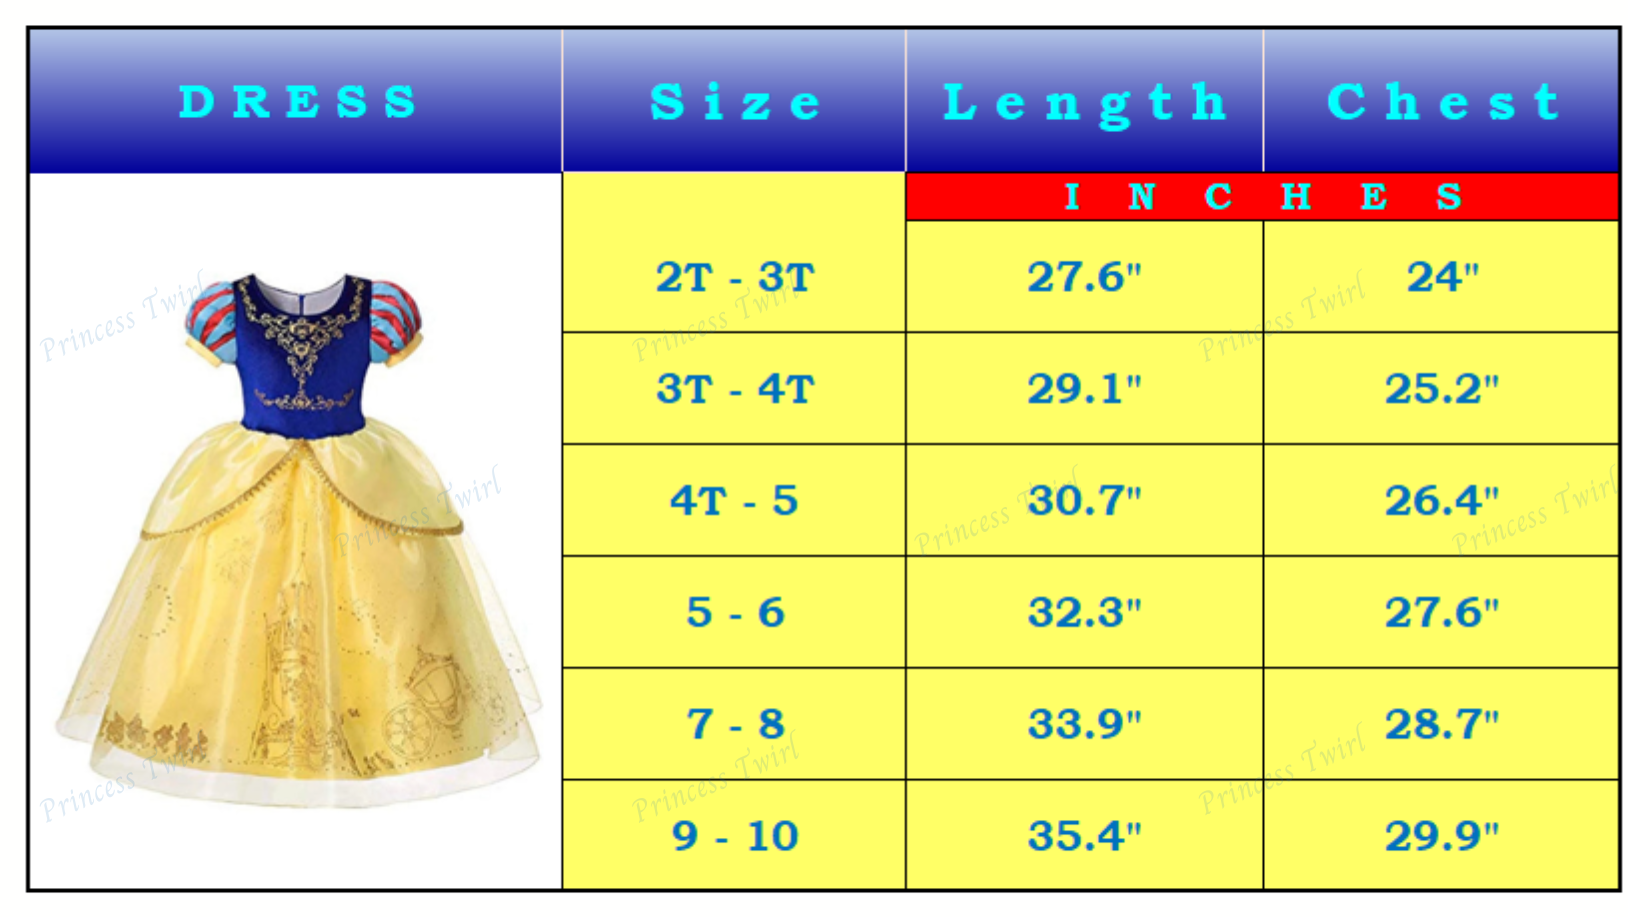 Disney-Inspired Snow White Deluxe Dress for Girls and Toddlers Costume